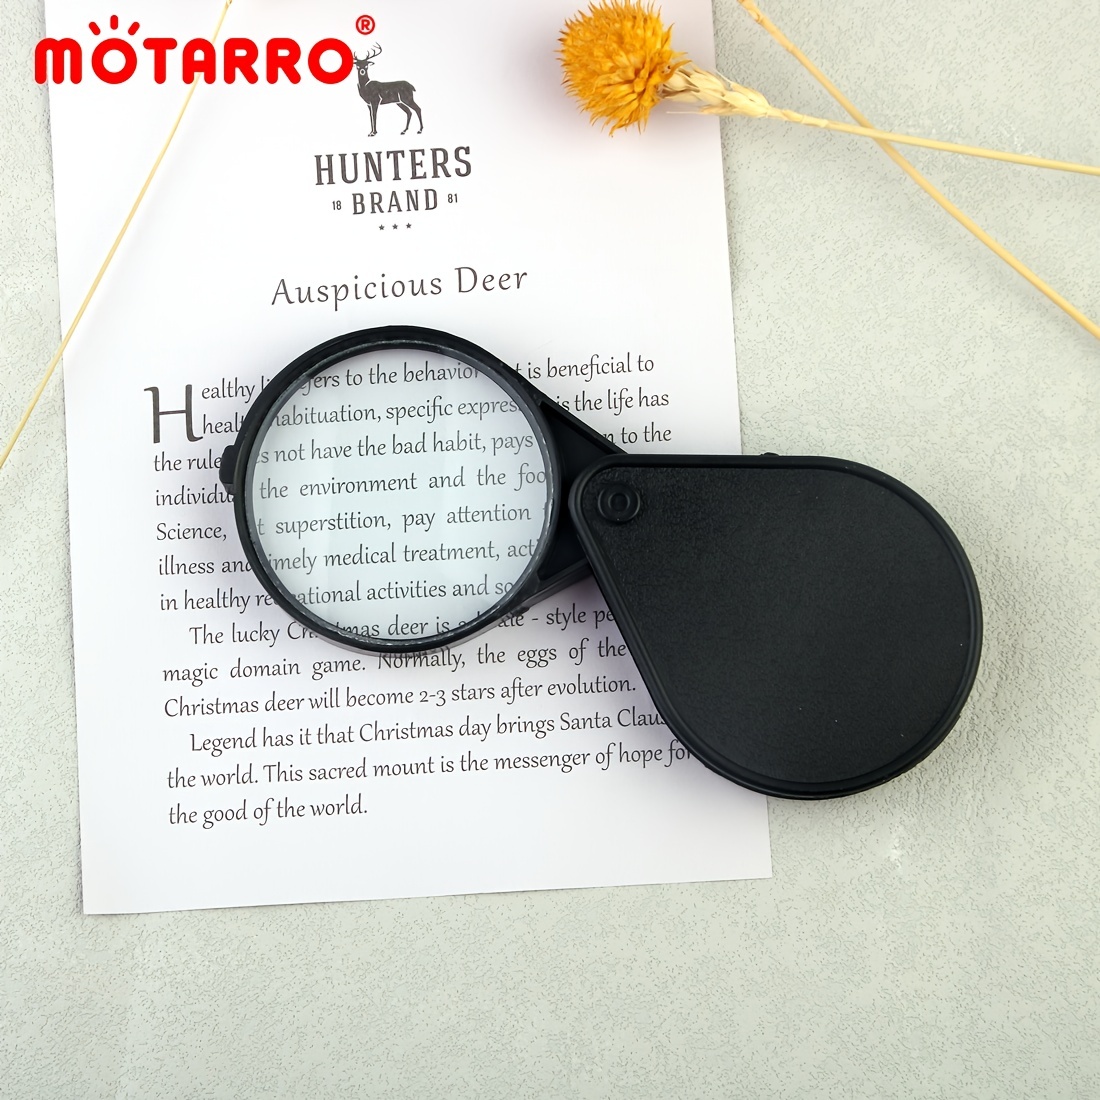 Keychain Pocket Magnifier 10x Small Magnifying Glass Portable Magnifying  Glasses For Kids Classroom Reading Outdoors Science - AliExpress